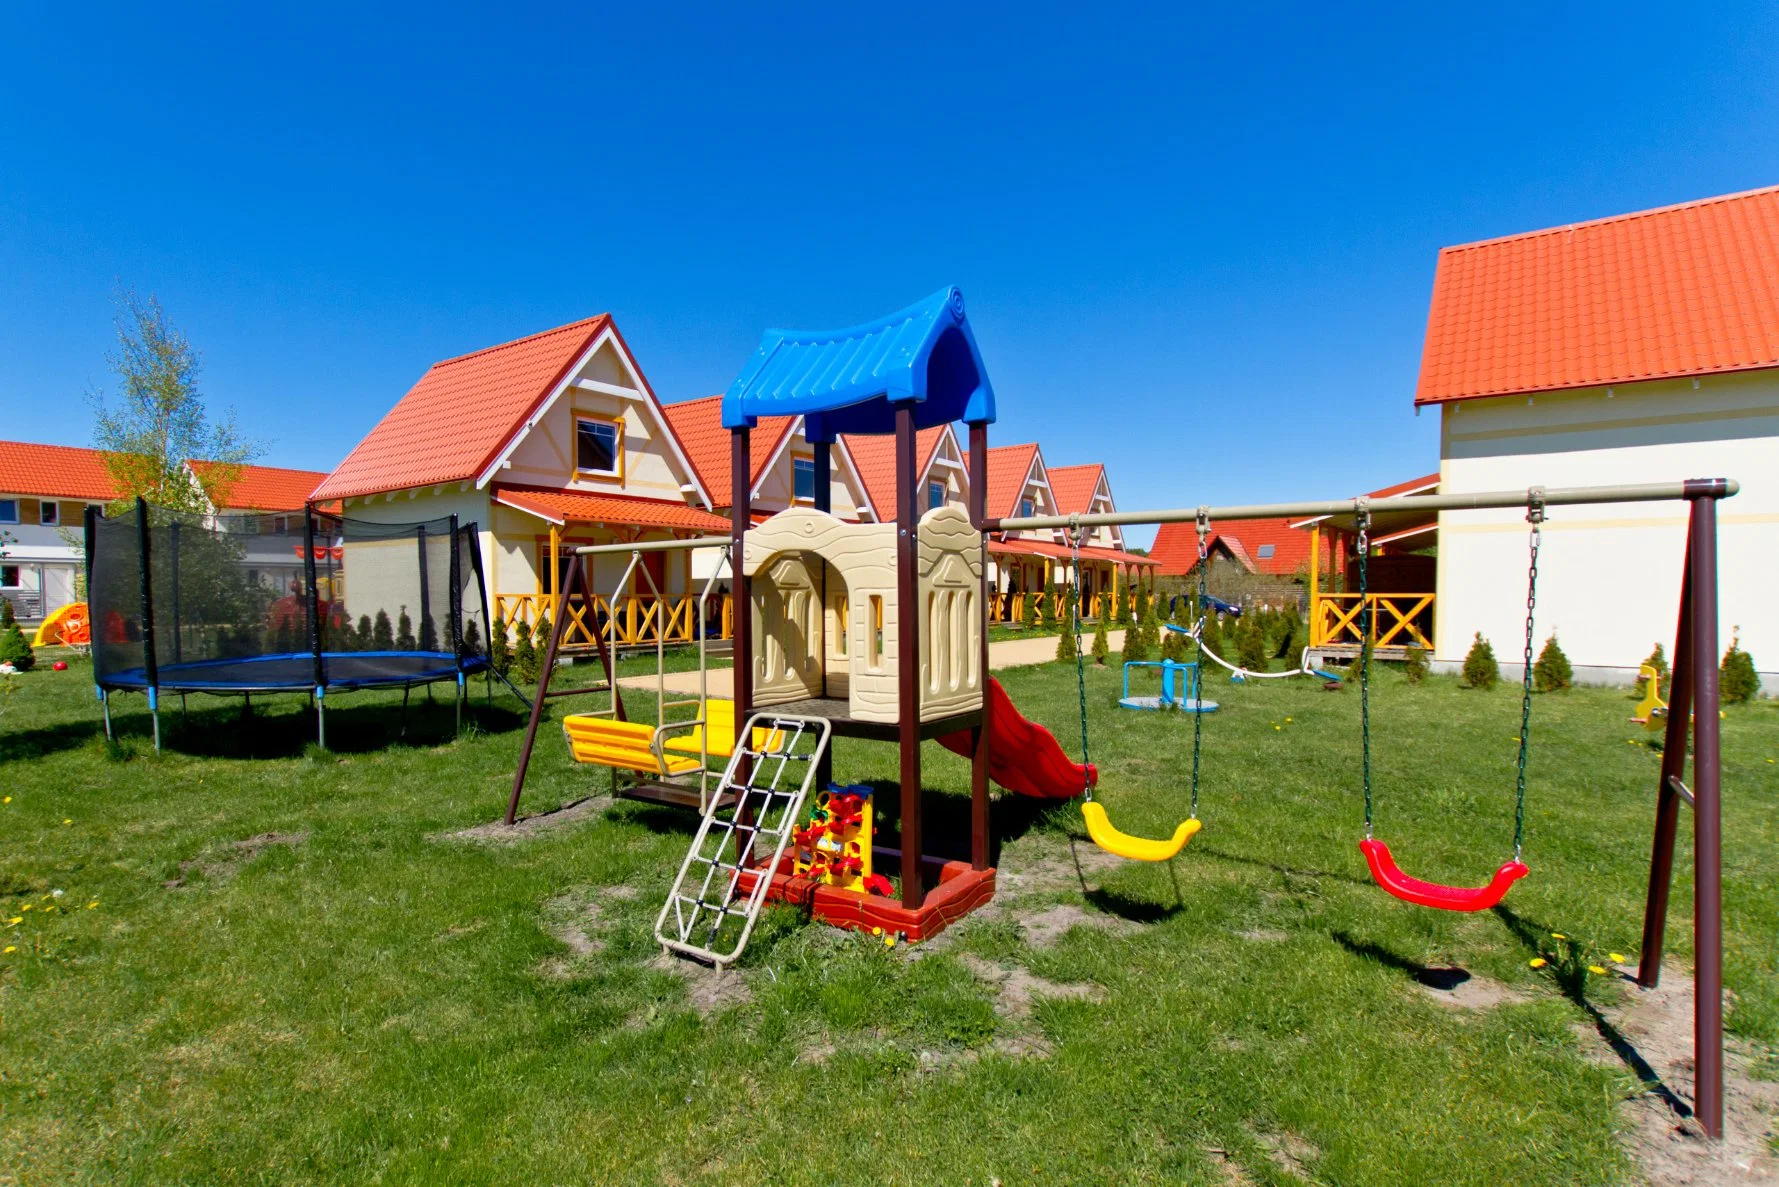 Newest Outdoor and Plastic Material Amusement Park Sets with Swing Set Slide